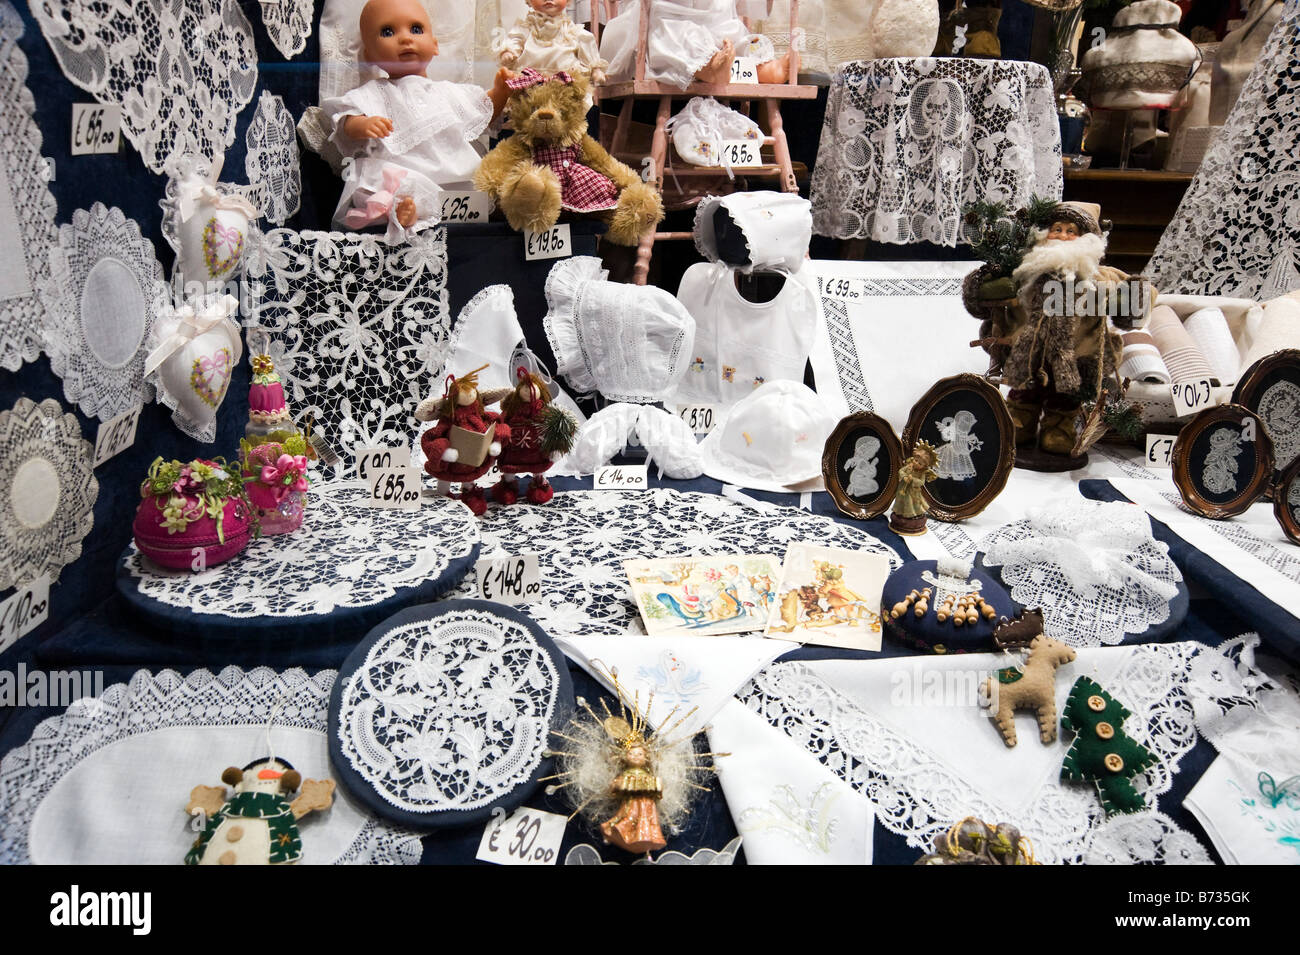 Display of lace items in a shop window in the old town, Bruges, Belgium Stock Photo